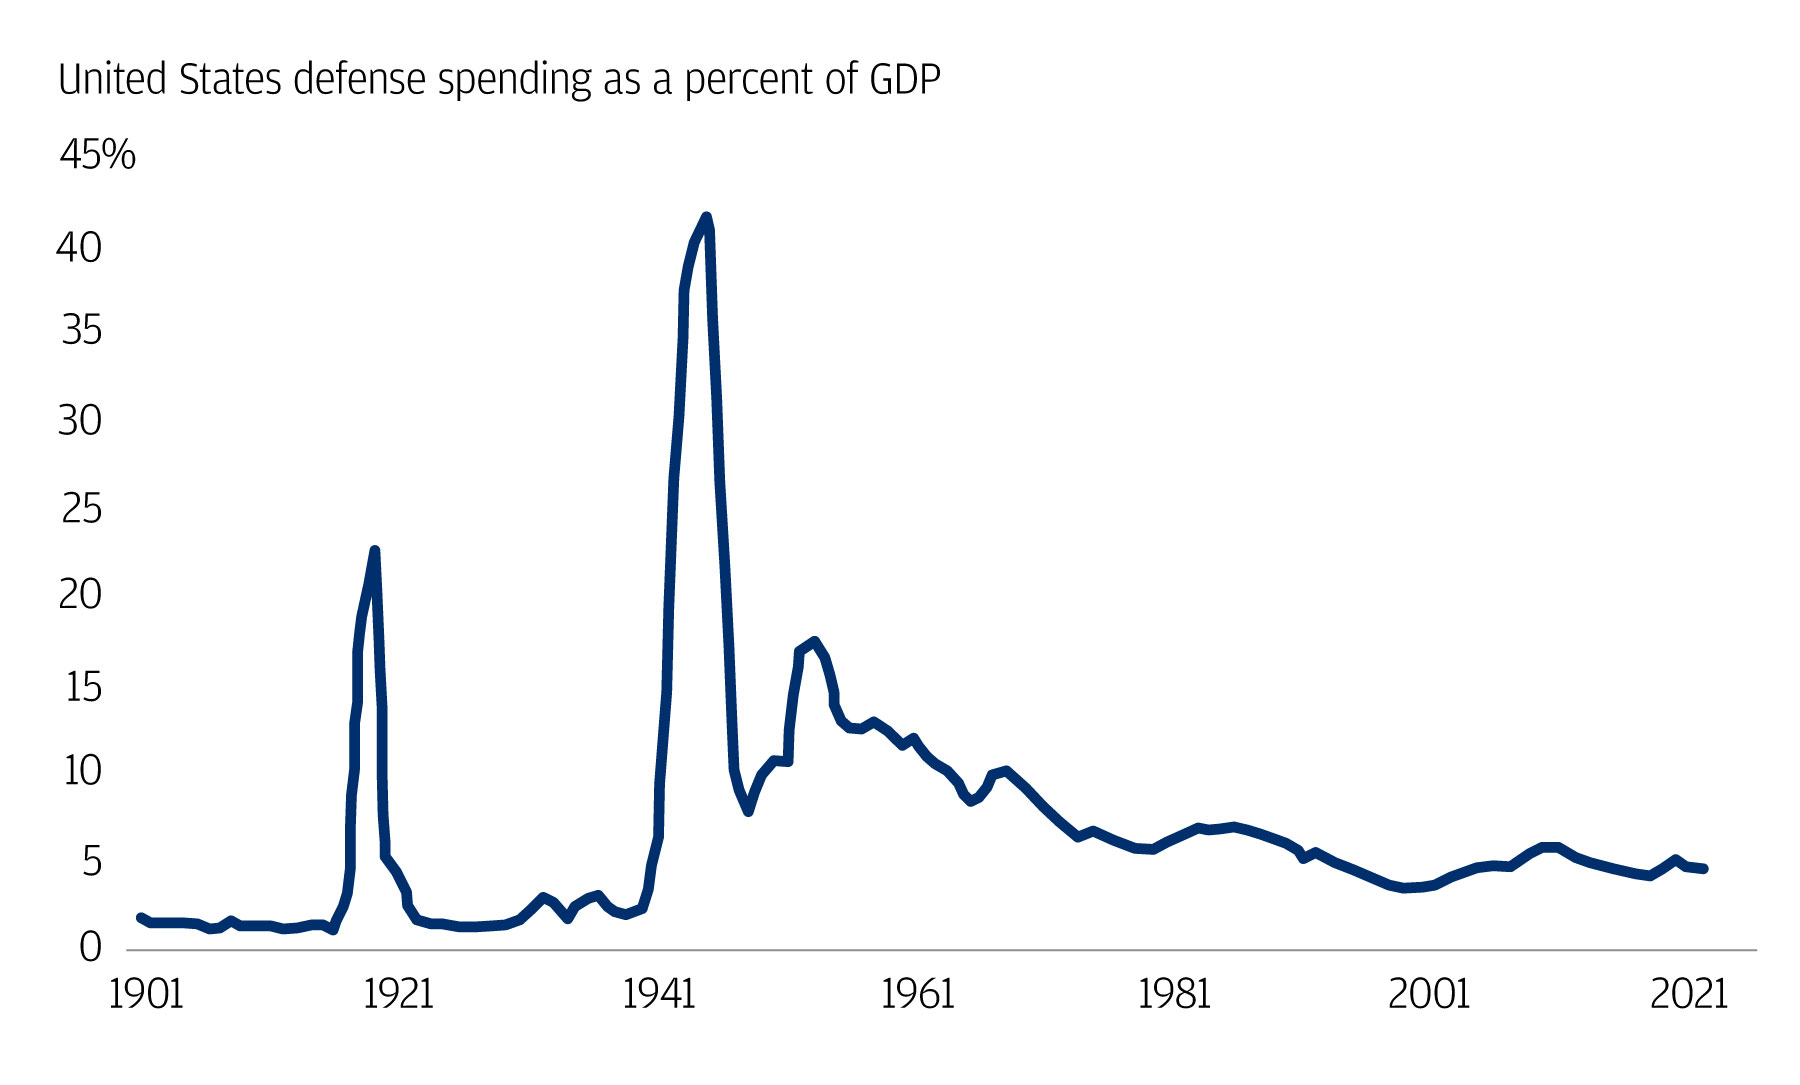 There are upside risks in the years ahead to U.S. military spending, which is currently historically low